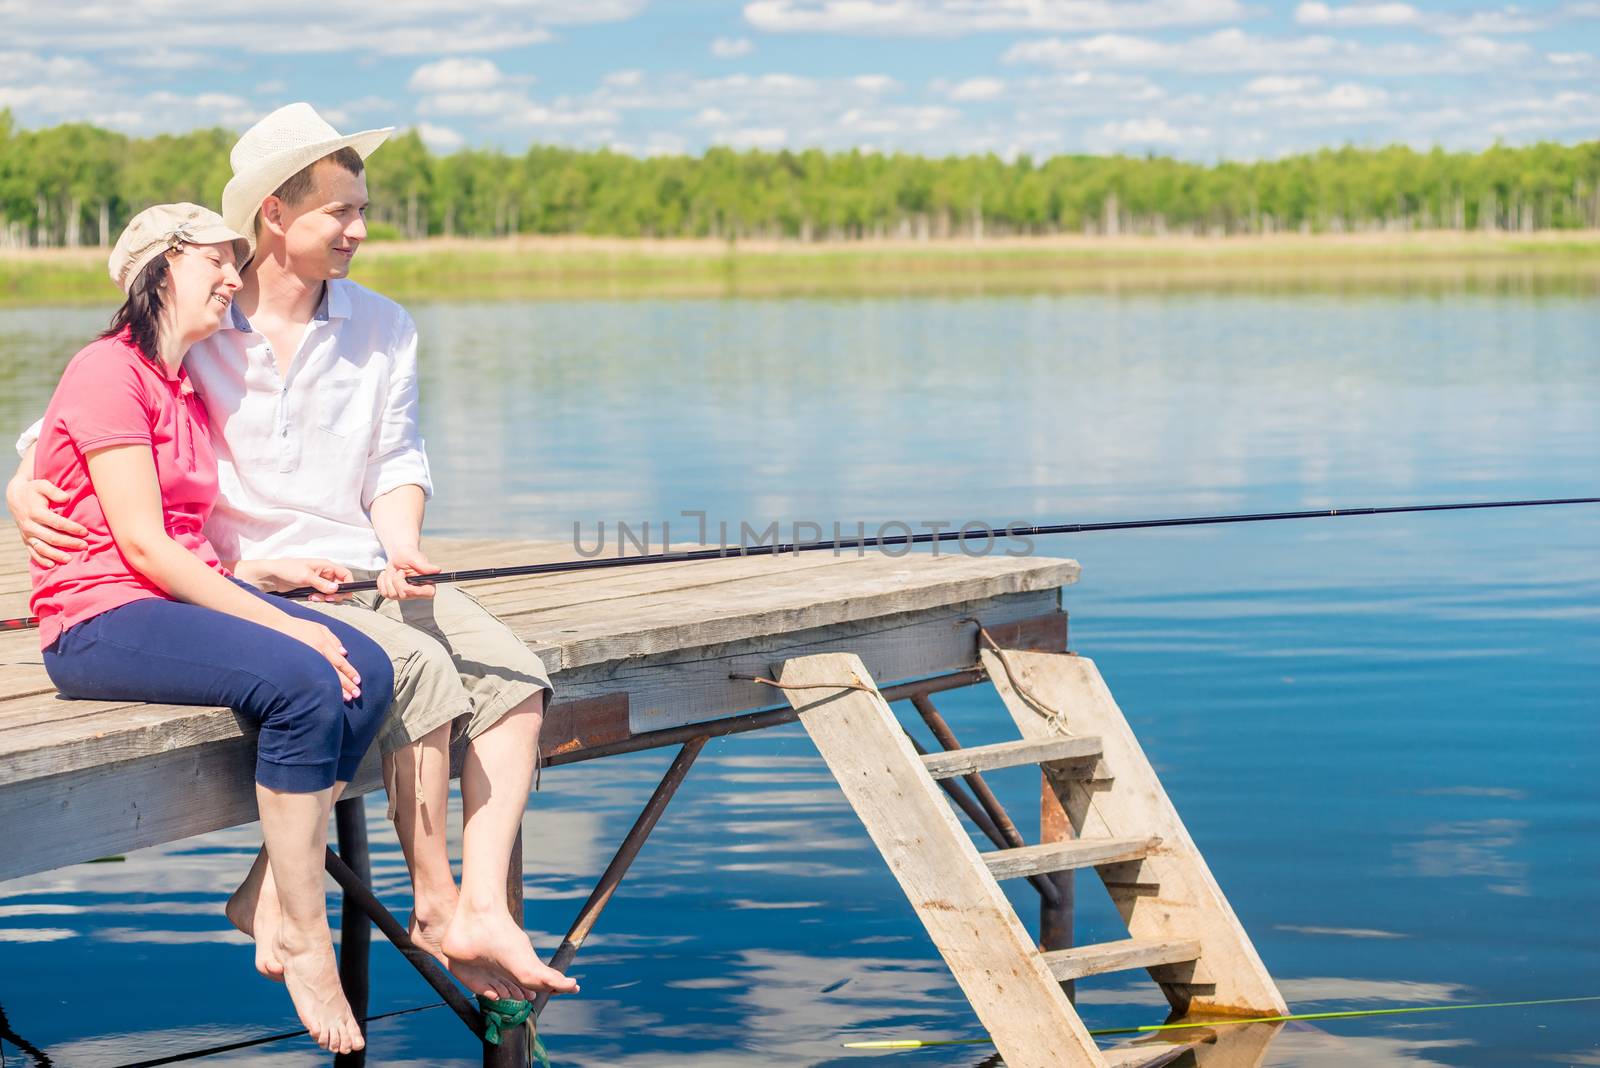 A married couple on a pier with bare feet catching a fish on a beautiful lake